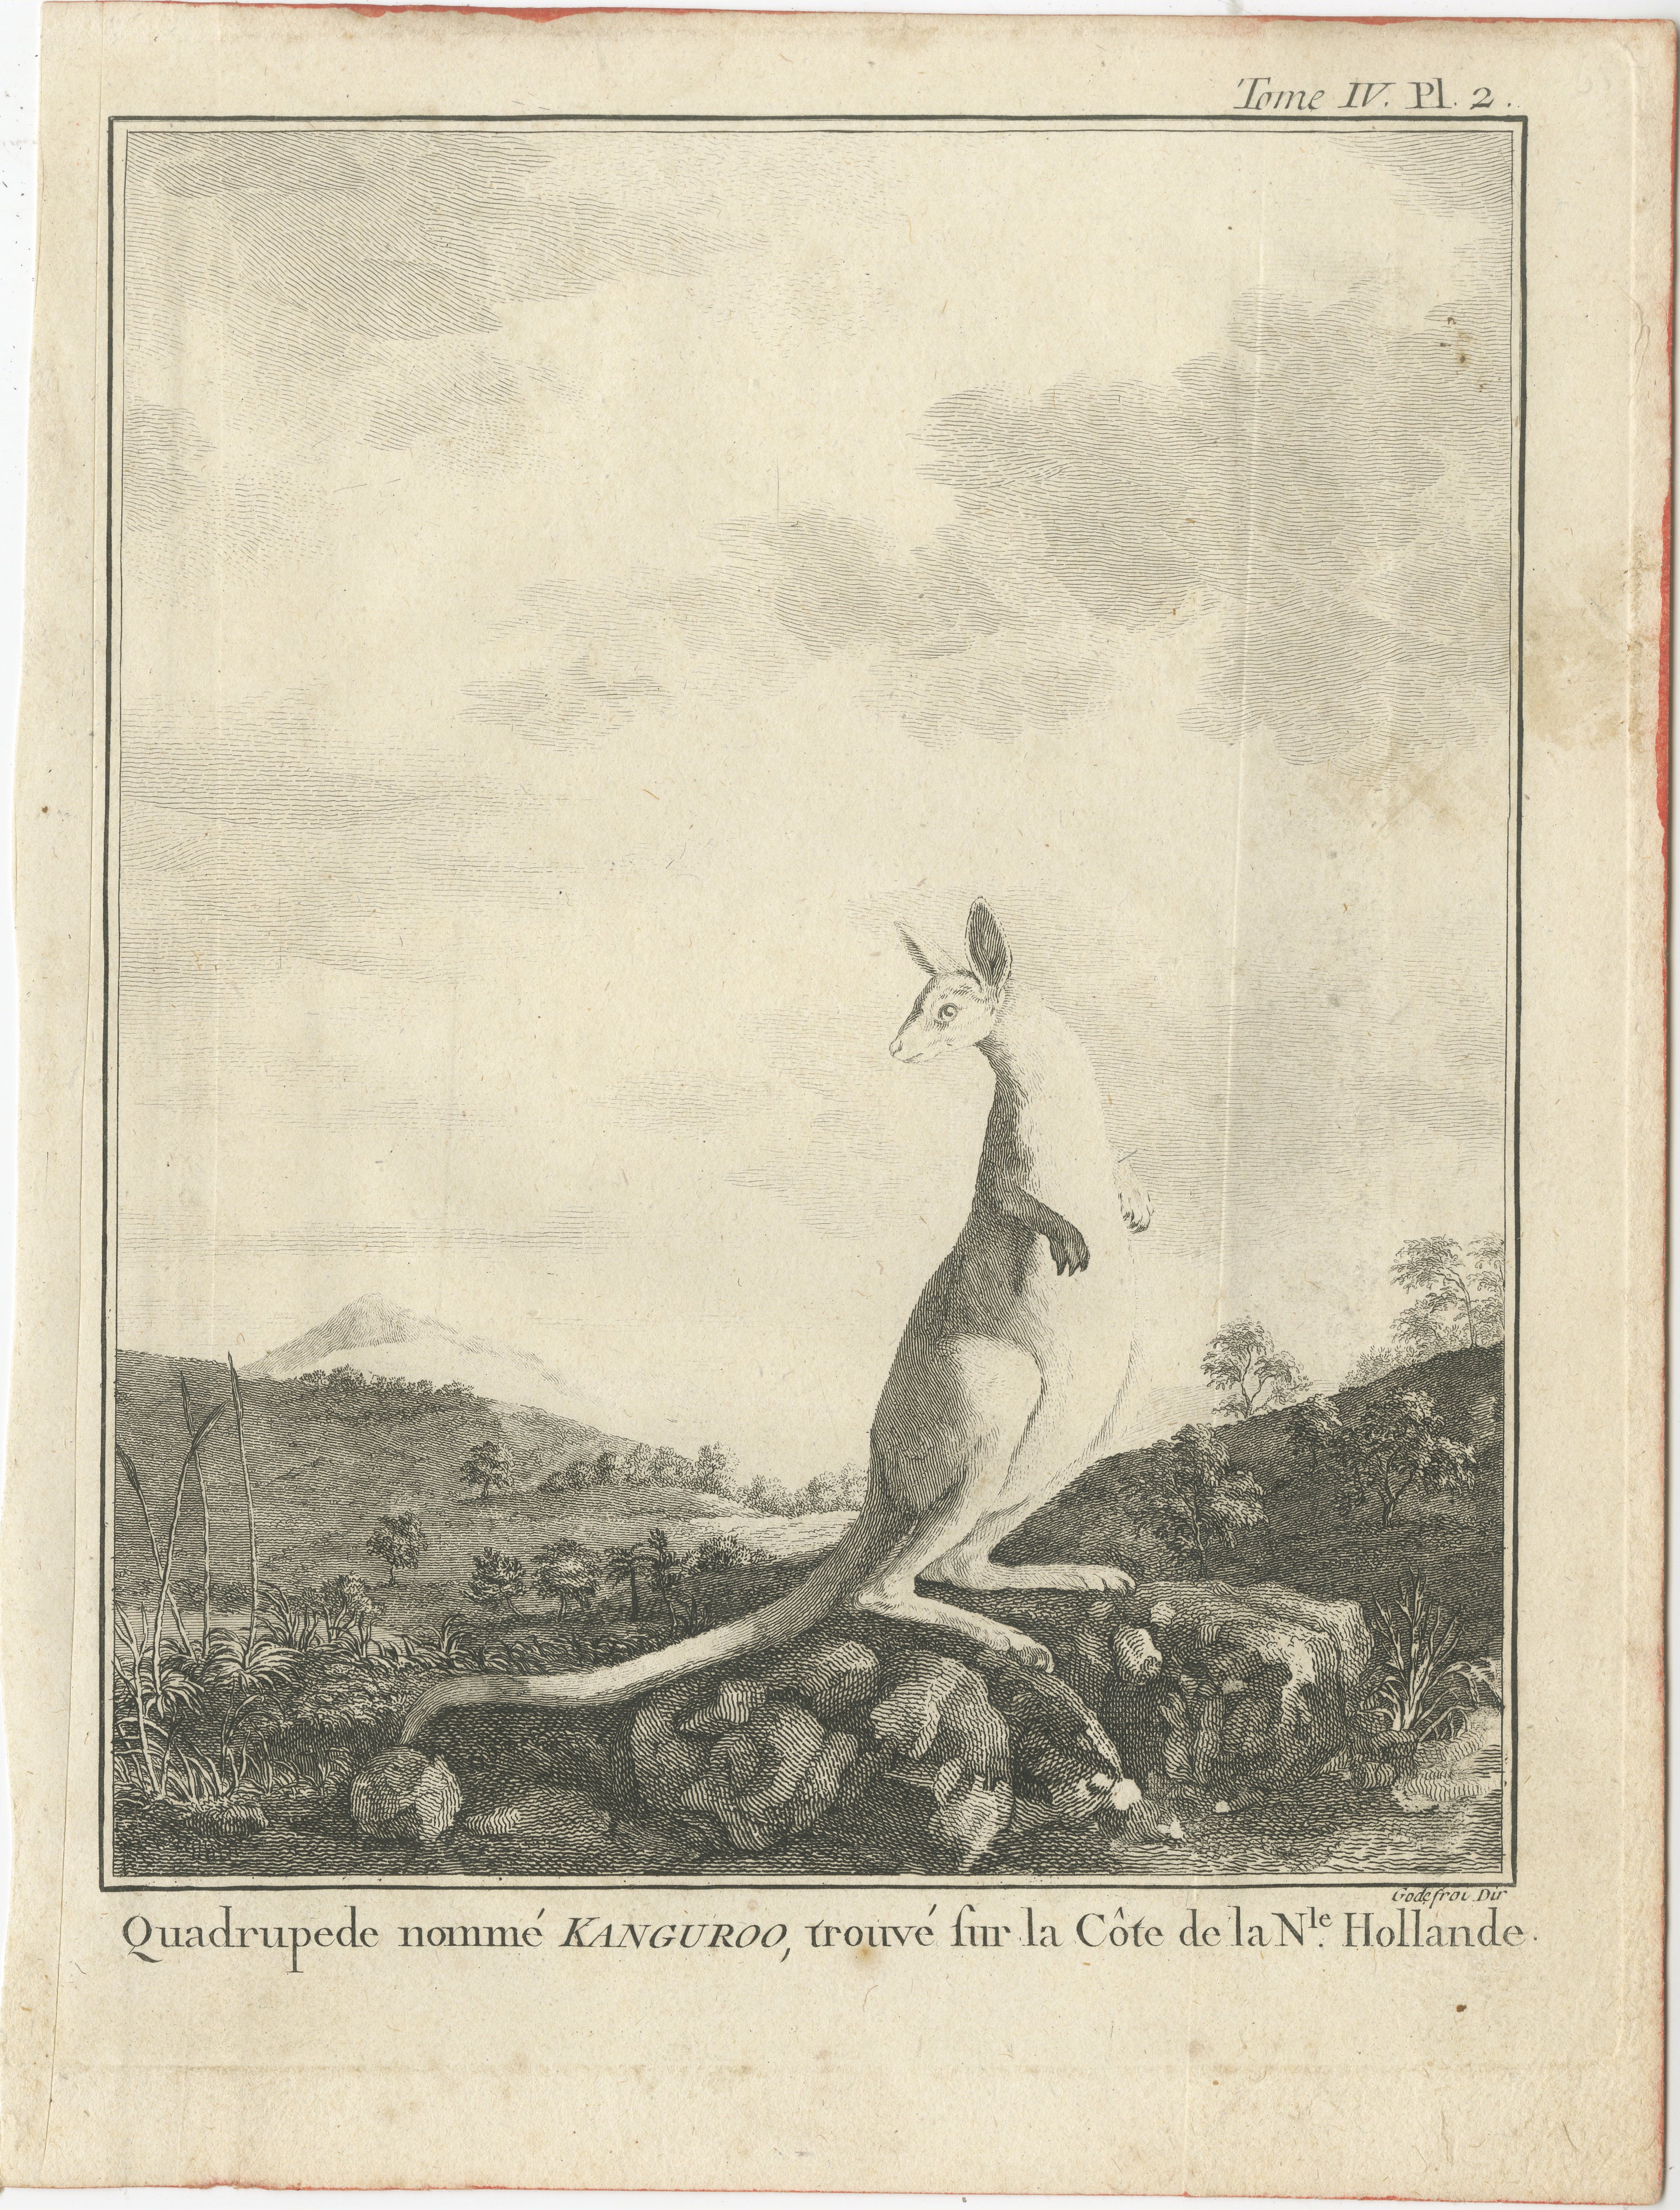 The title 'Quadrupede Nomme Kanguroo, Trouve sur la Cote de la N'le Hollande' refers to an uncolored engraving depicting a Kangaroo, originally found and described during Captain Cook's first voyage, later rendered by George Stubbs in the English